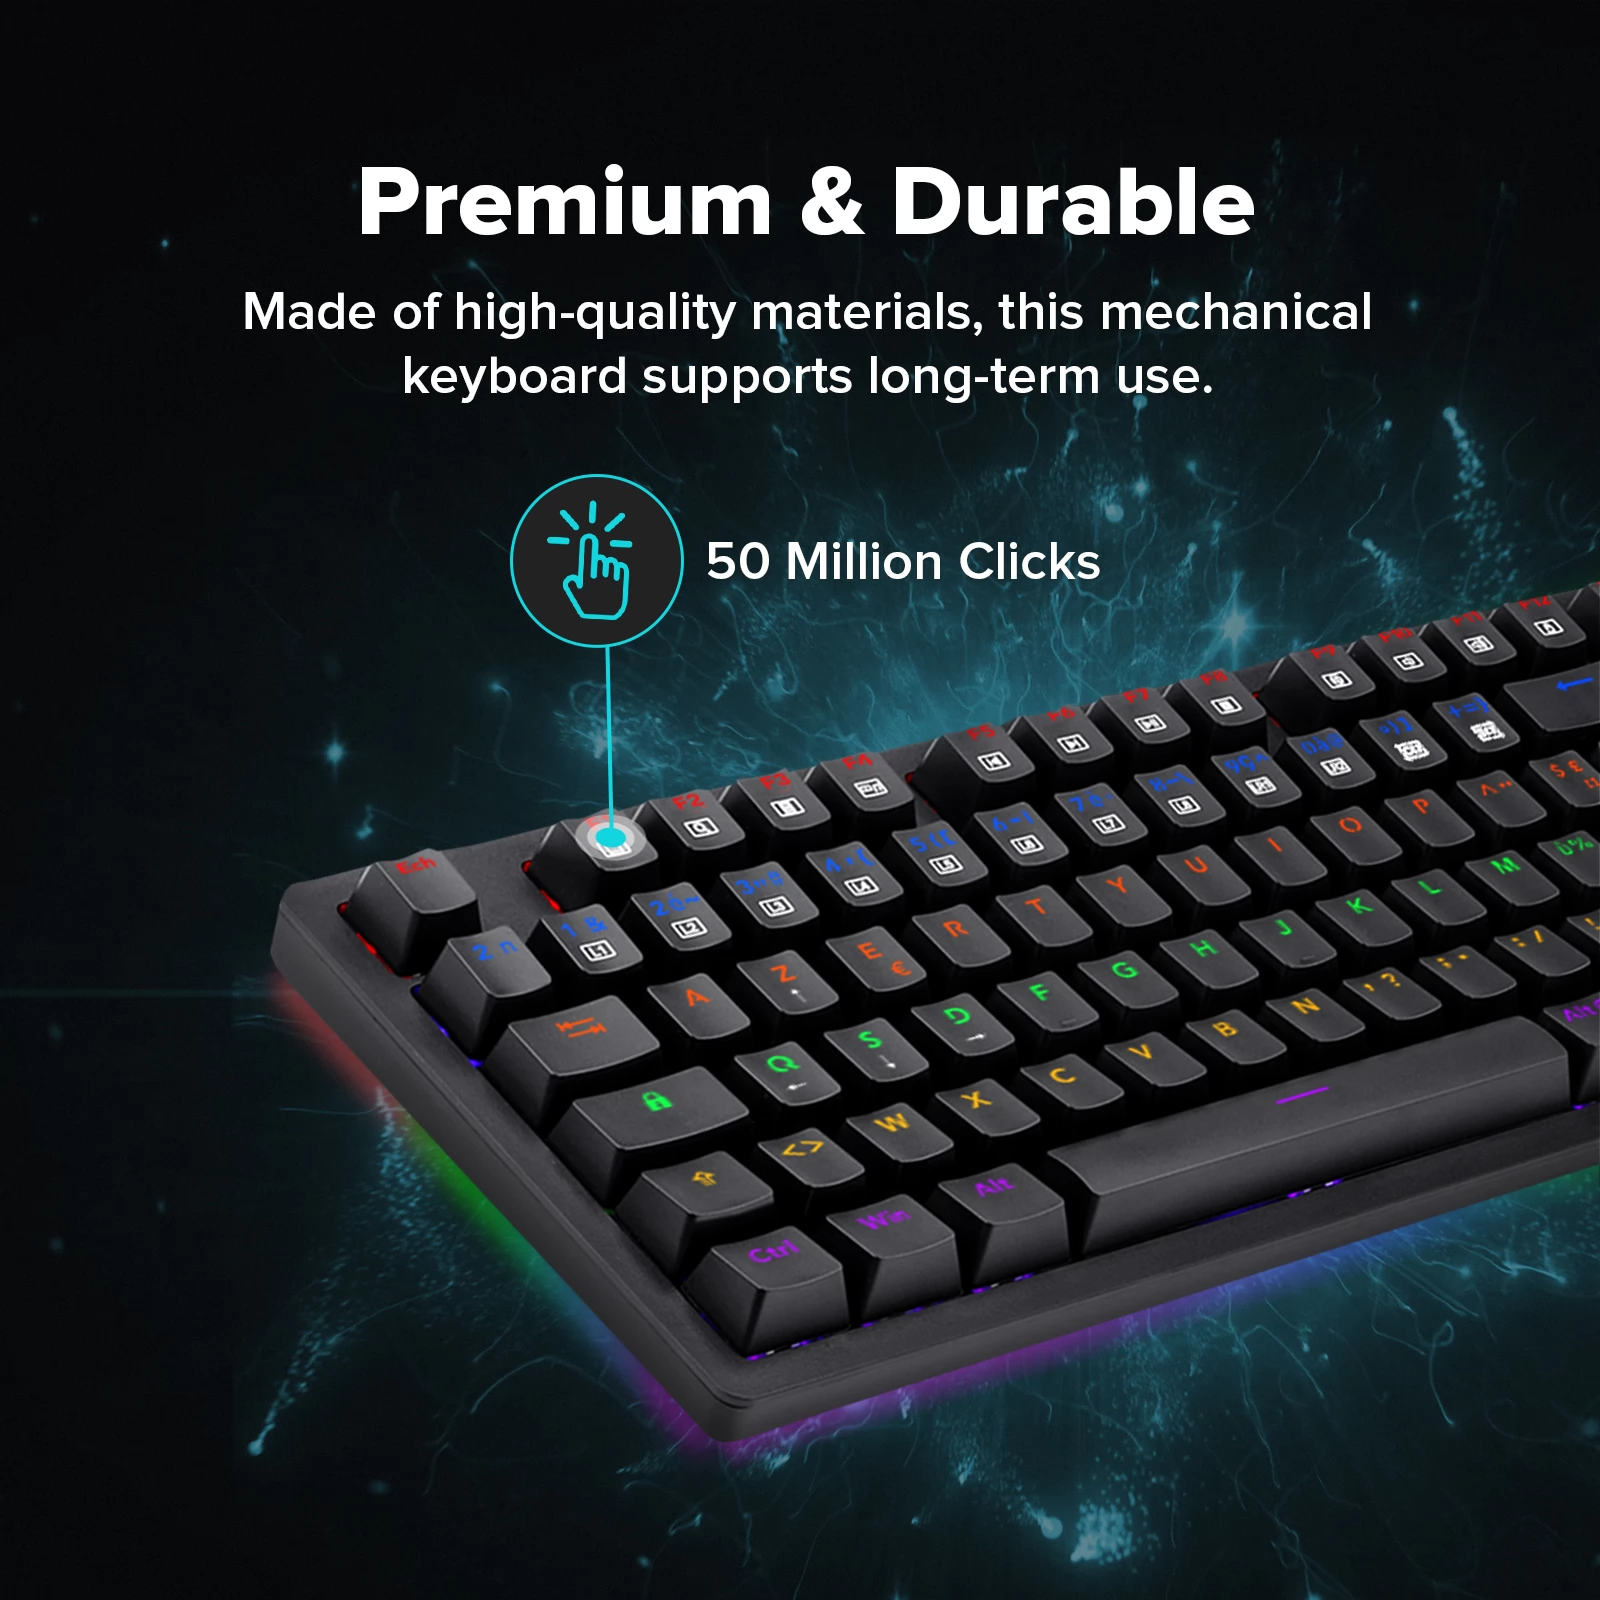 Redragon S113-KN Gaming Keyboard Mouse Combo, Rainbow Keyboard, AZERTY French Layout and RGB Gaming Mouse